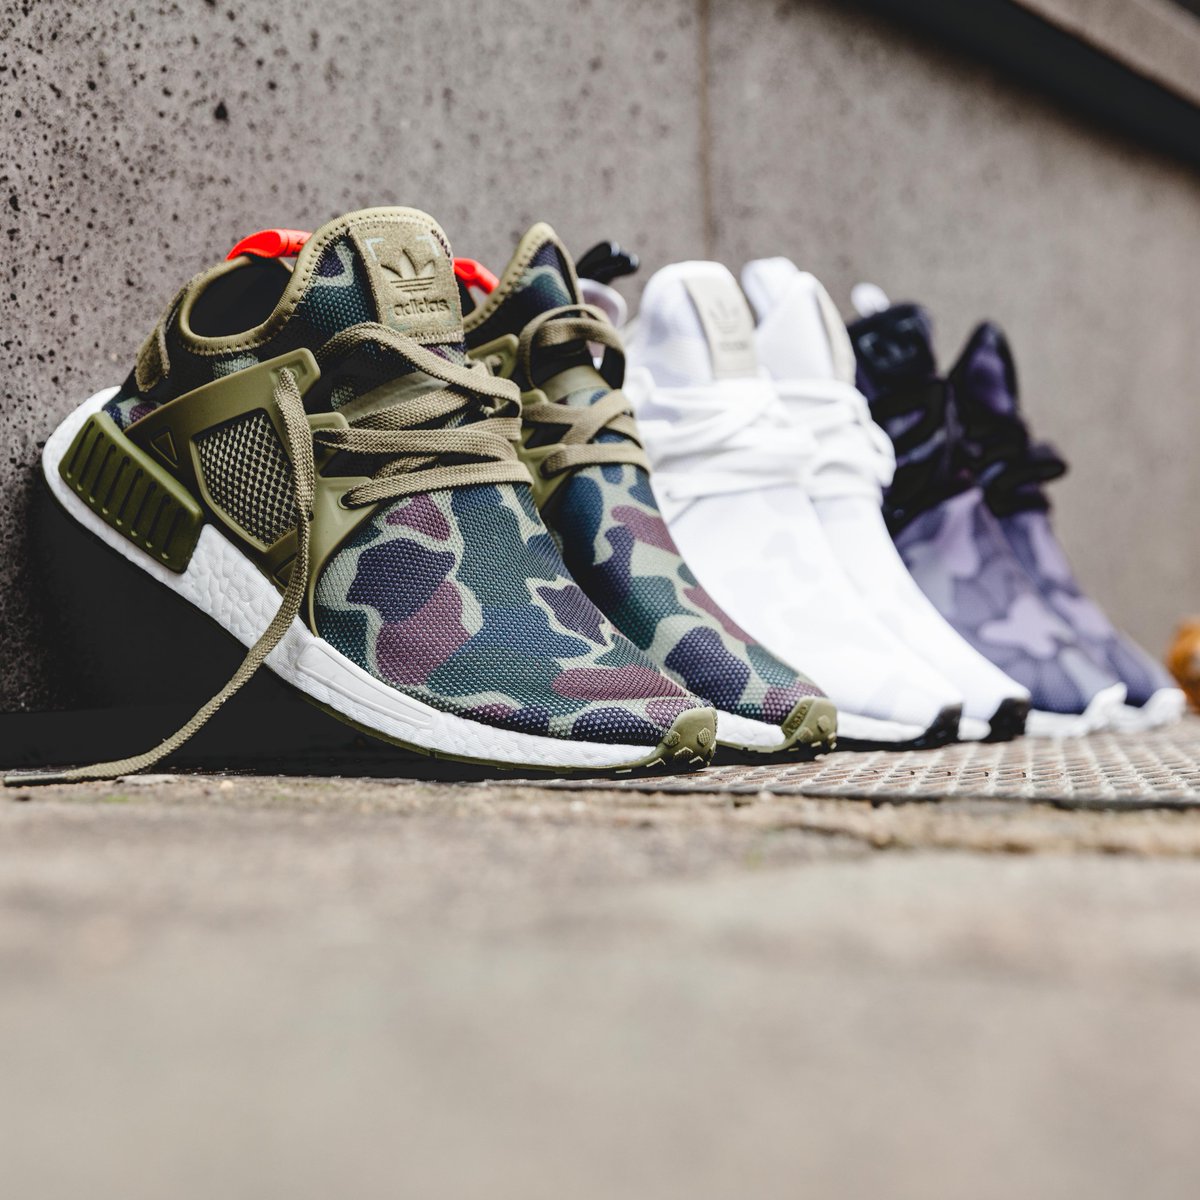 Now NMD XR1 "Duck Camo" Pack — Shouts